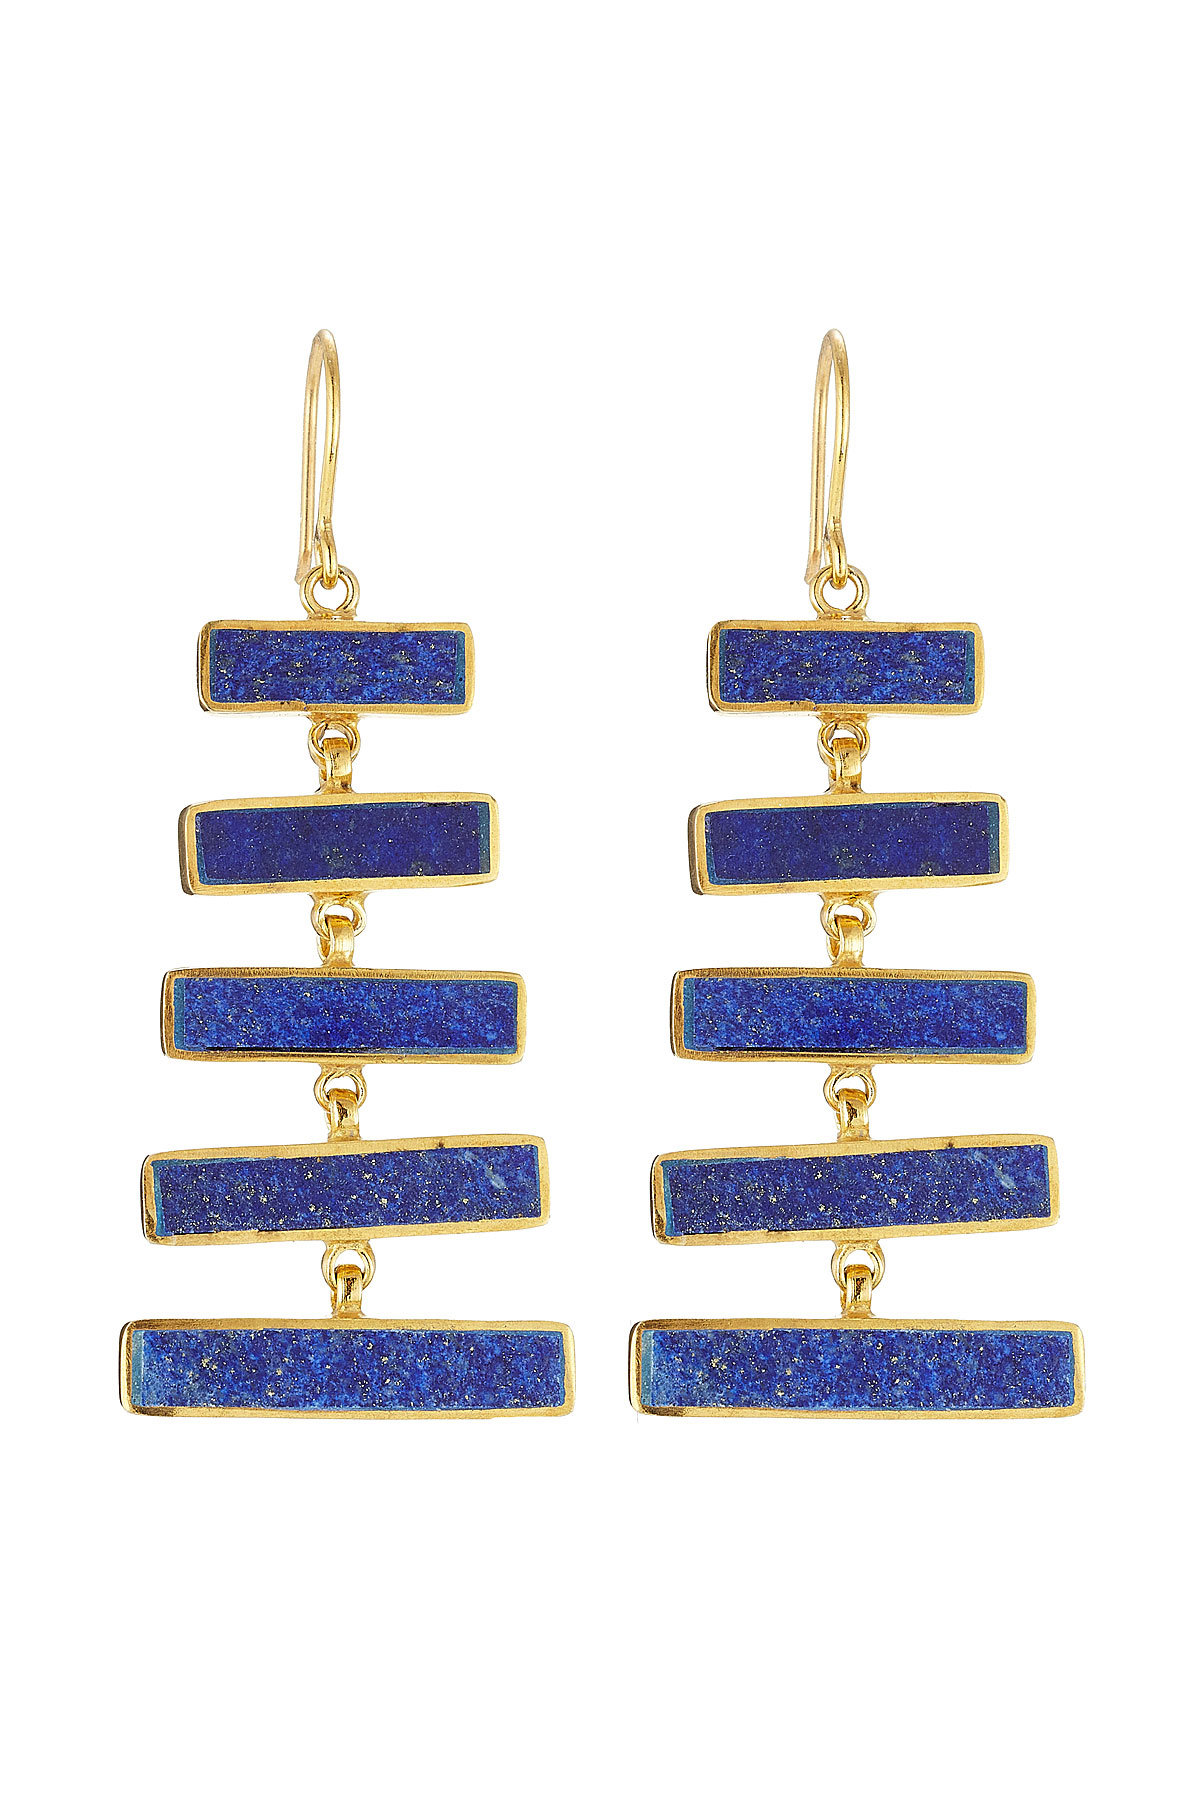 Pippa Small - Gold Plated Silver Earrings with Lapis